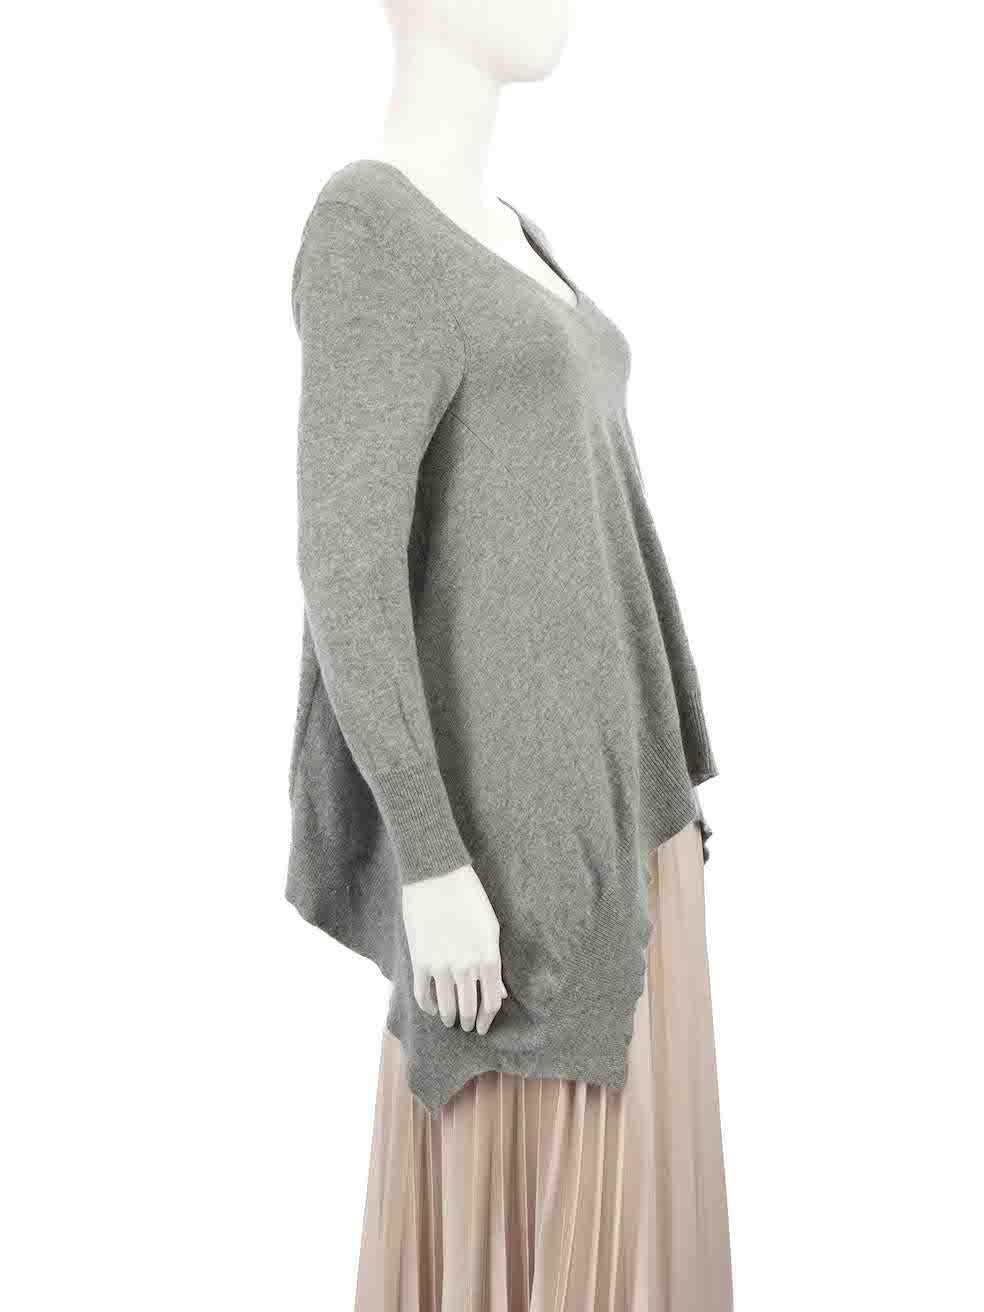 CONDITION is Very good. Hardly any visible wear to jumper is evident on this used Madeleine Thompson designer resale item.
 
 
 
 
 
 Details
 
 
 Grey
 
 Cashmere
 
 Knit top
 
 V-neck
 
 Draped hem
 
 Long sleeves
 
 
 
 
 
 Made in China
 
 
 
